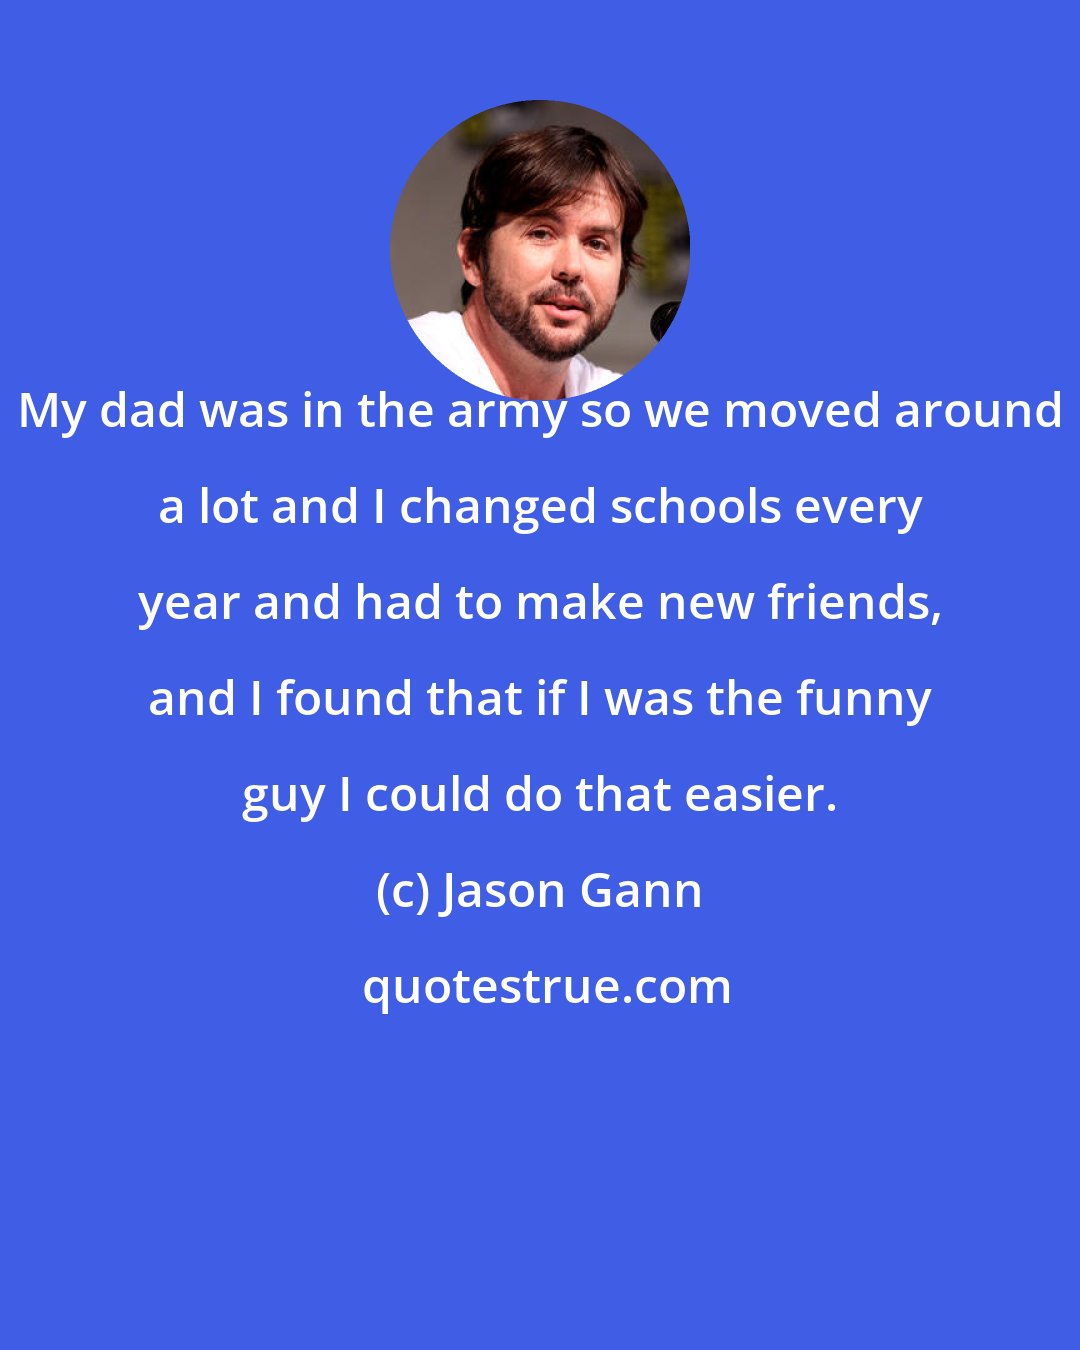 Jason Gann: My dad was in the army so we moved around a lot and I changed schools every year and had to make new friends, and I found that if I was the funny guy I could do that easier.